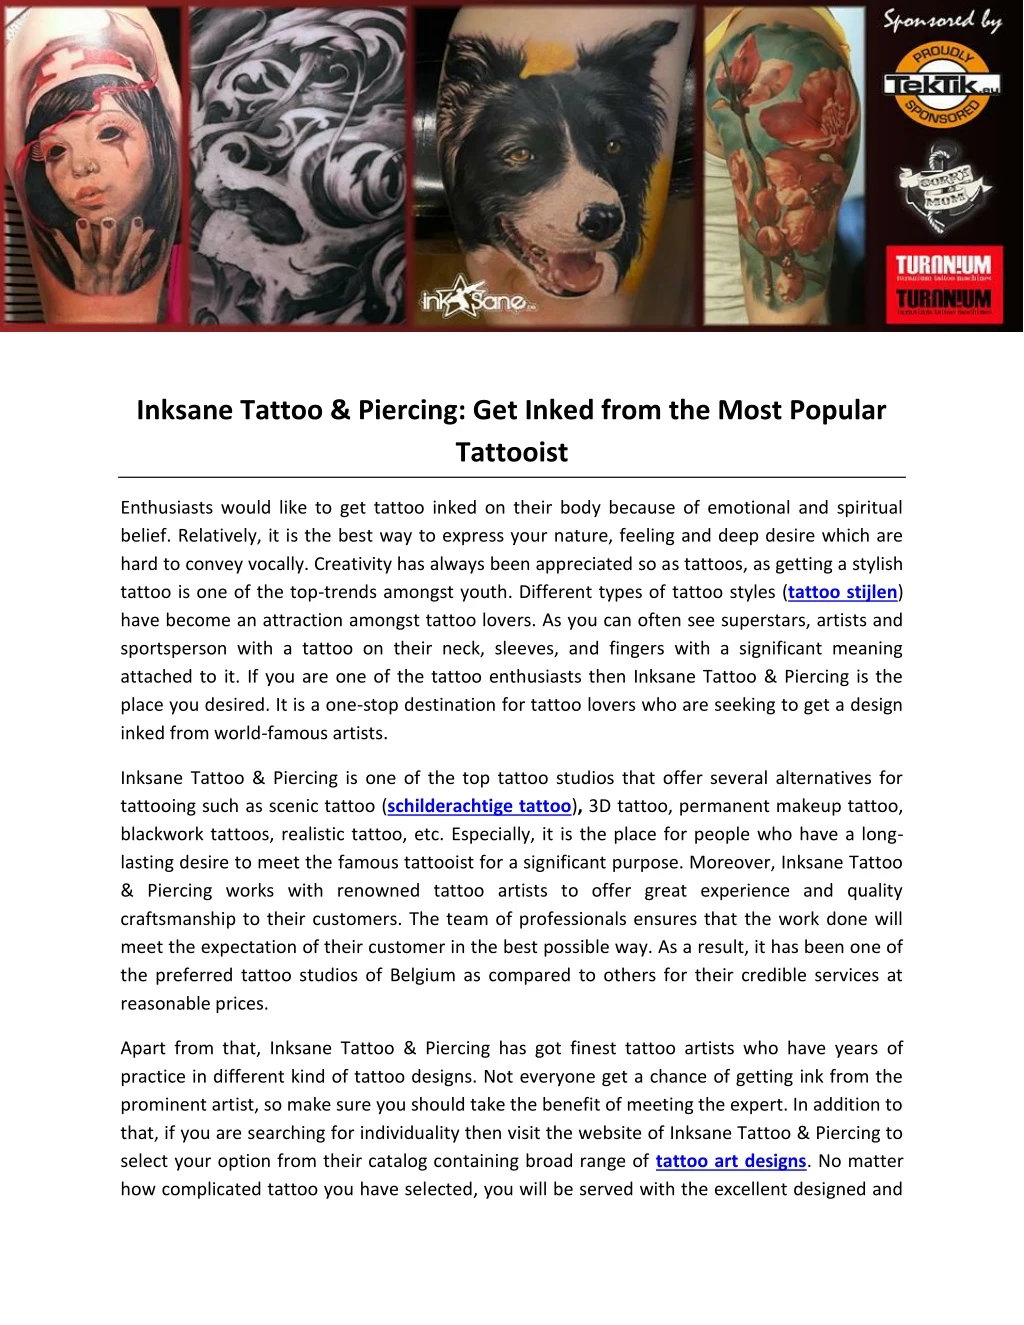 inksane tattoo piercing get inked from the most